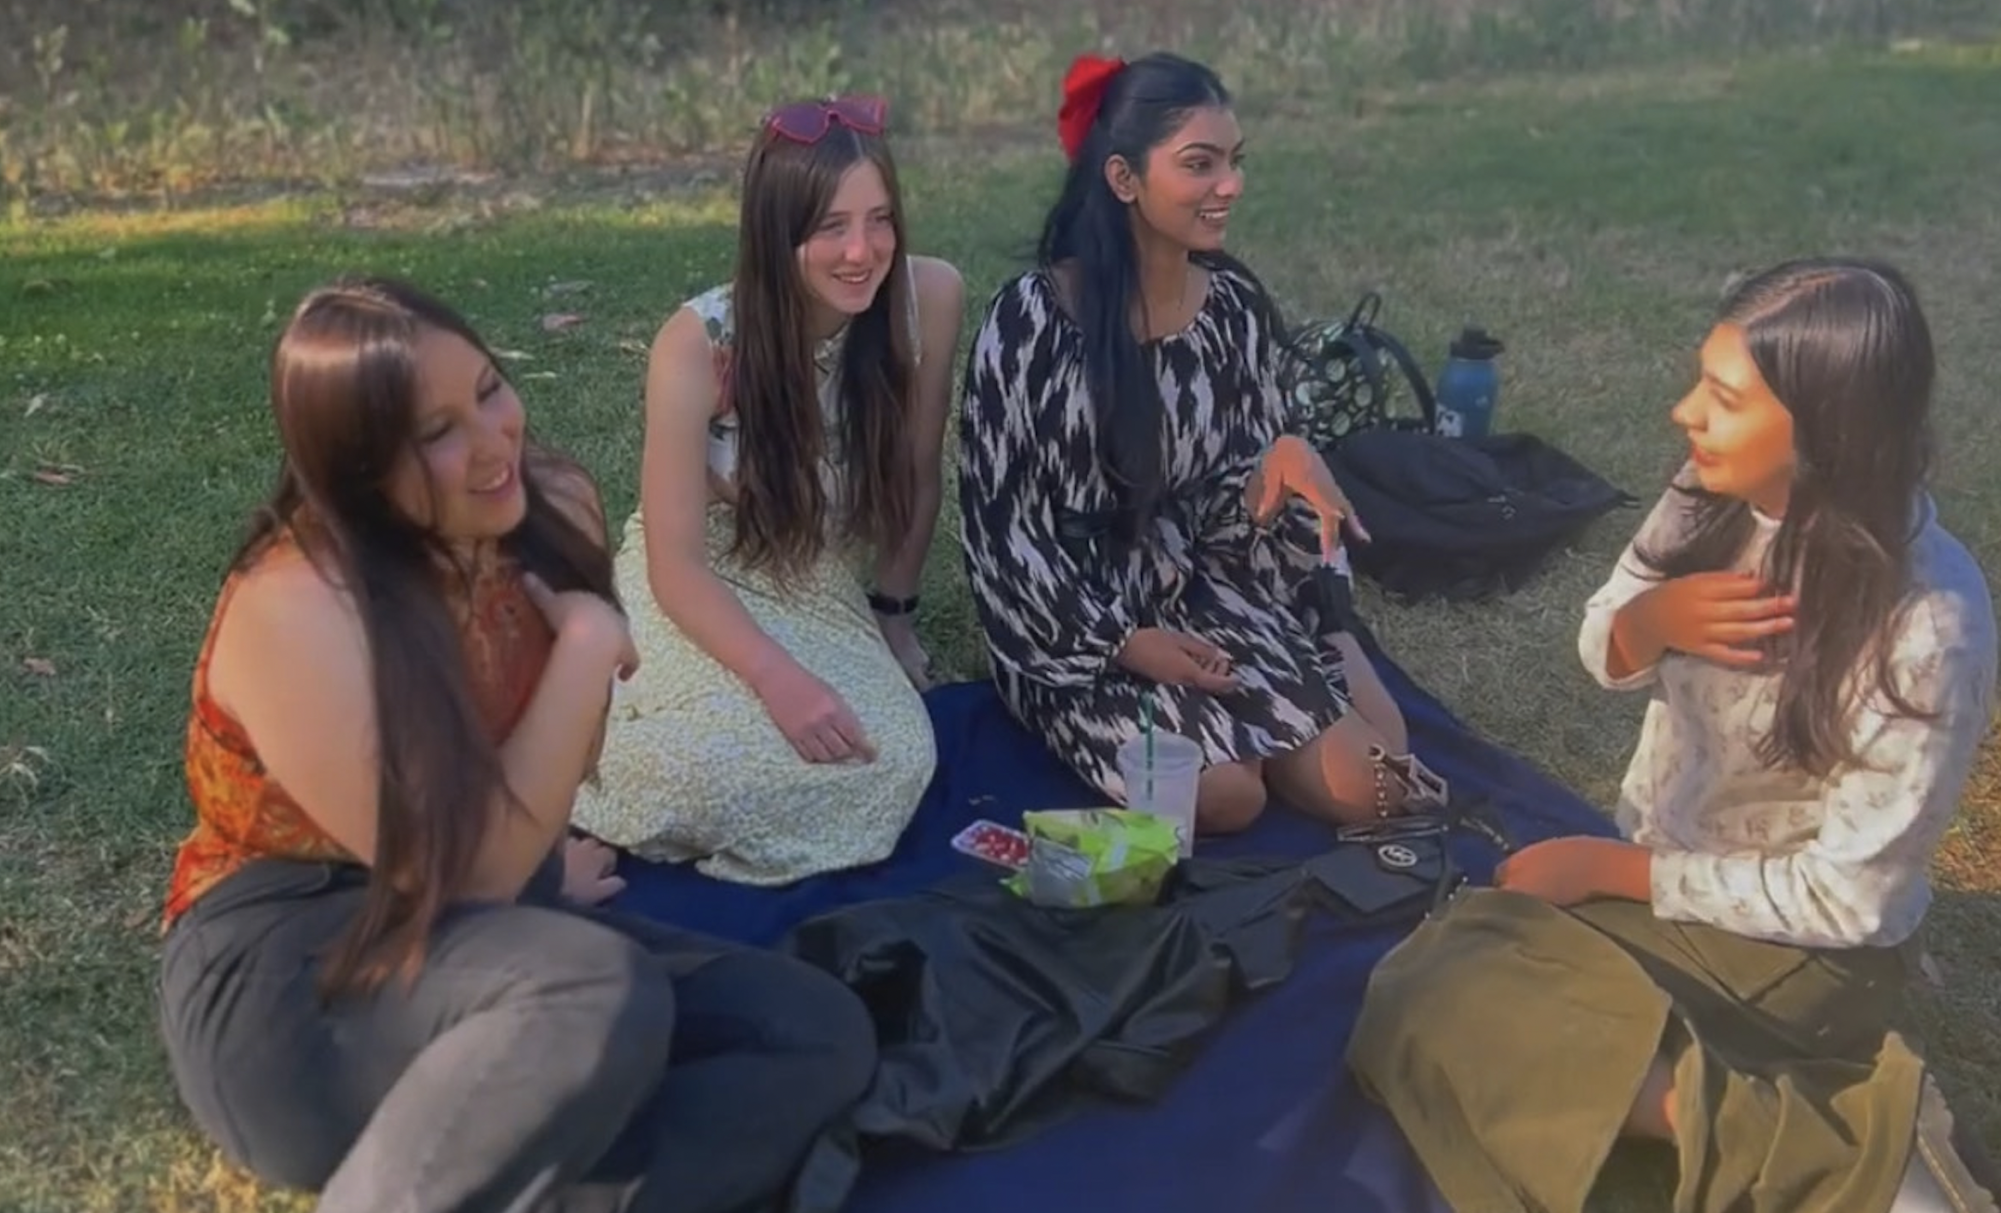 Shot from Mr Wards period 3 music video project, including Mia Estrada, Erica Sherkin, Preet Kaur and Rachel Reyes